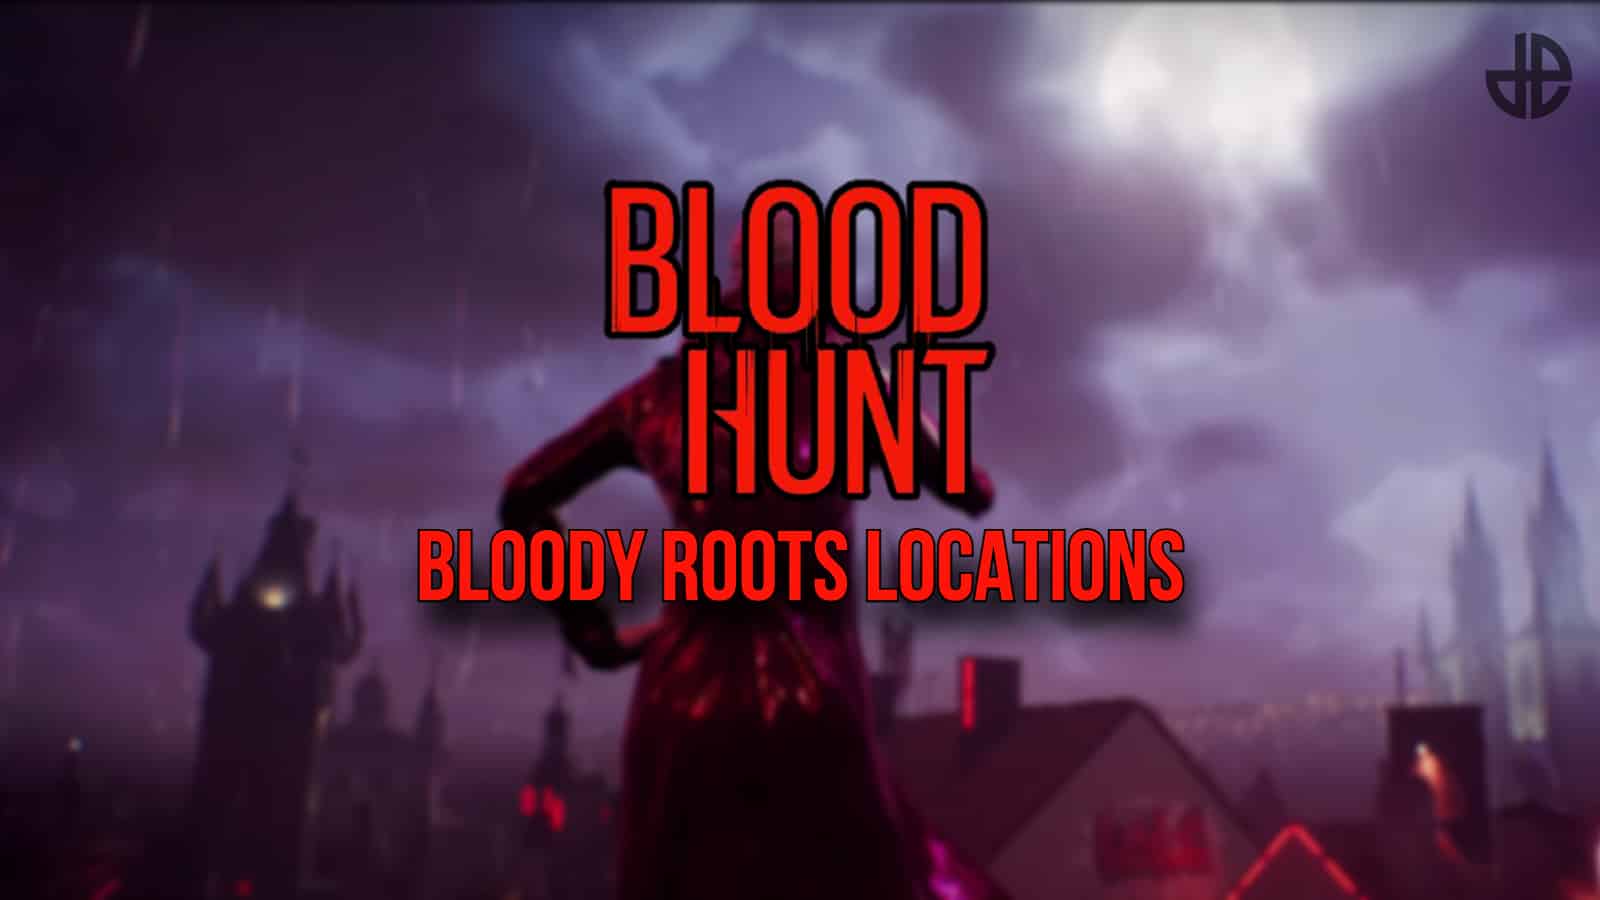 Bloodhunt Bloody Roots location guide